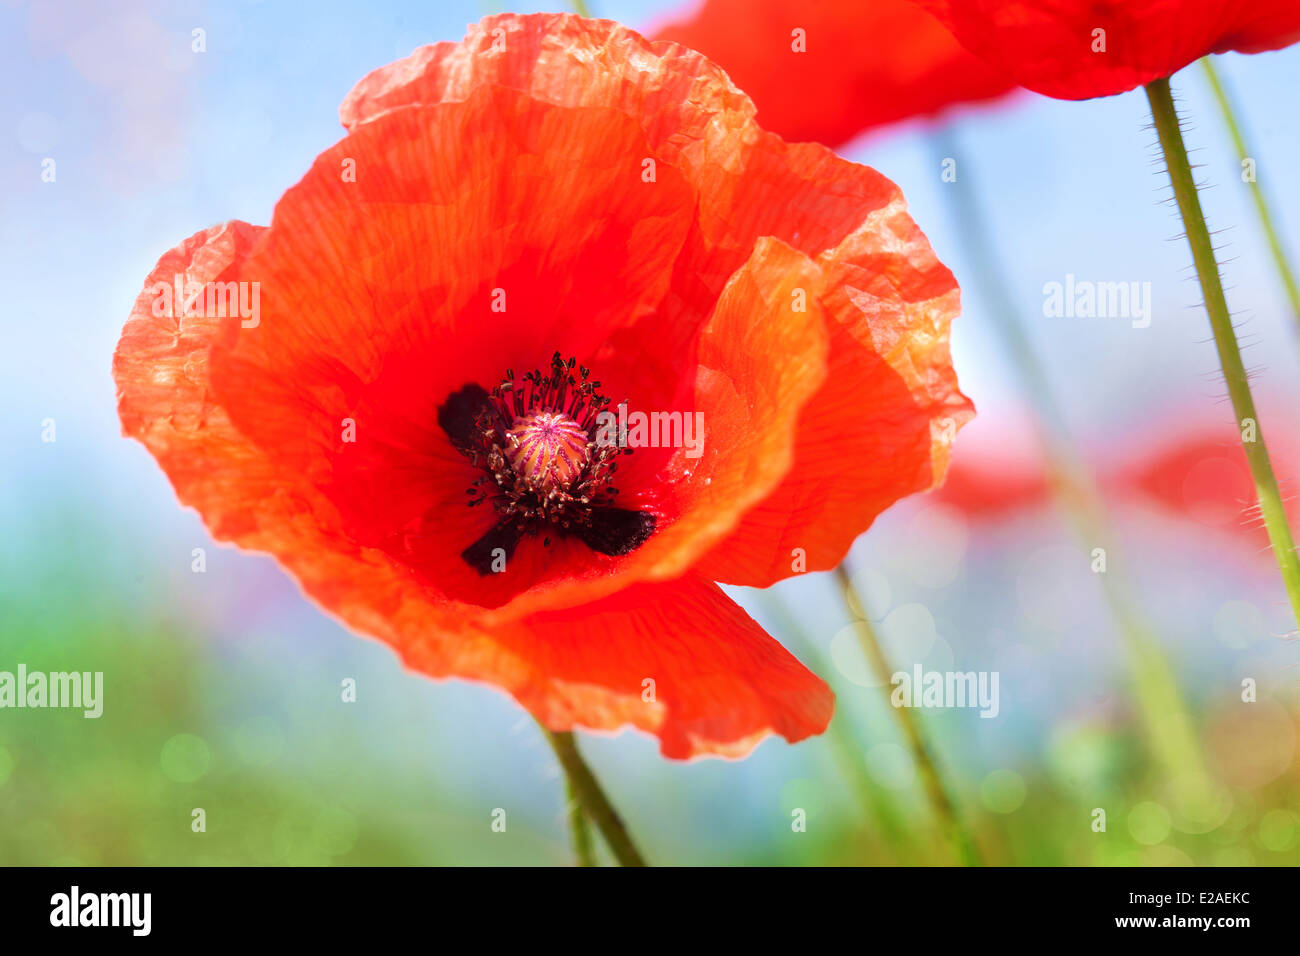 Poppy flower close up against the sky Stock Photo